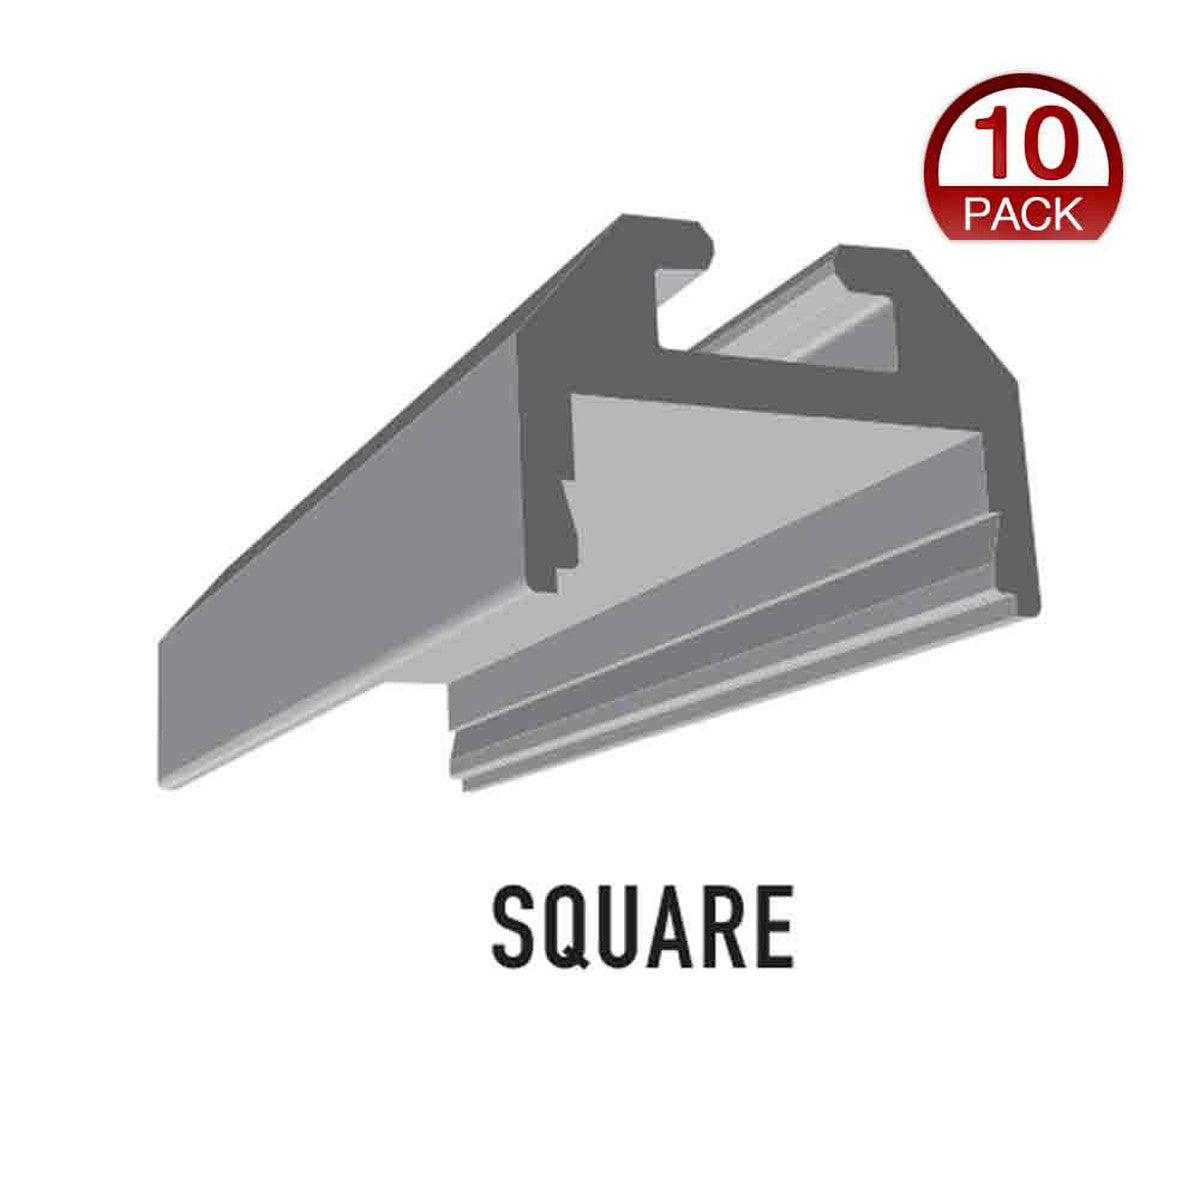 96in. Chromapath Builder, Square Black LED Channels for 12mm strip lights, Pack of 10 - Bees Lighting